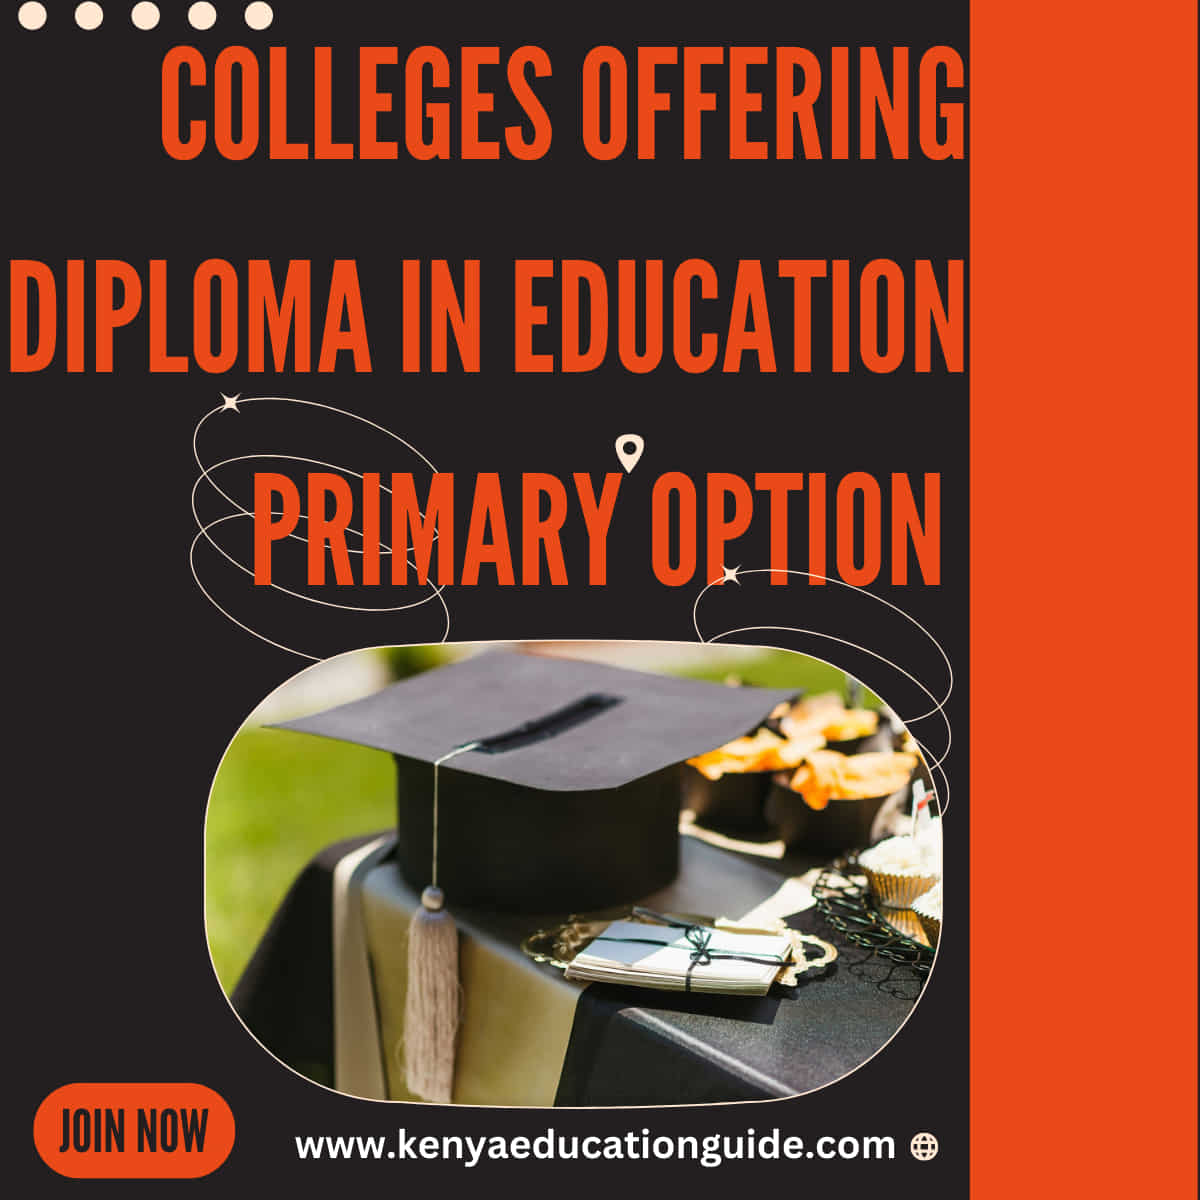 Colleges offering diploma in education primary option 